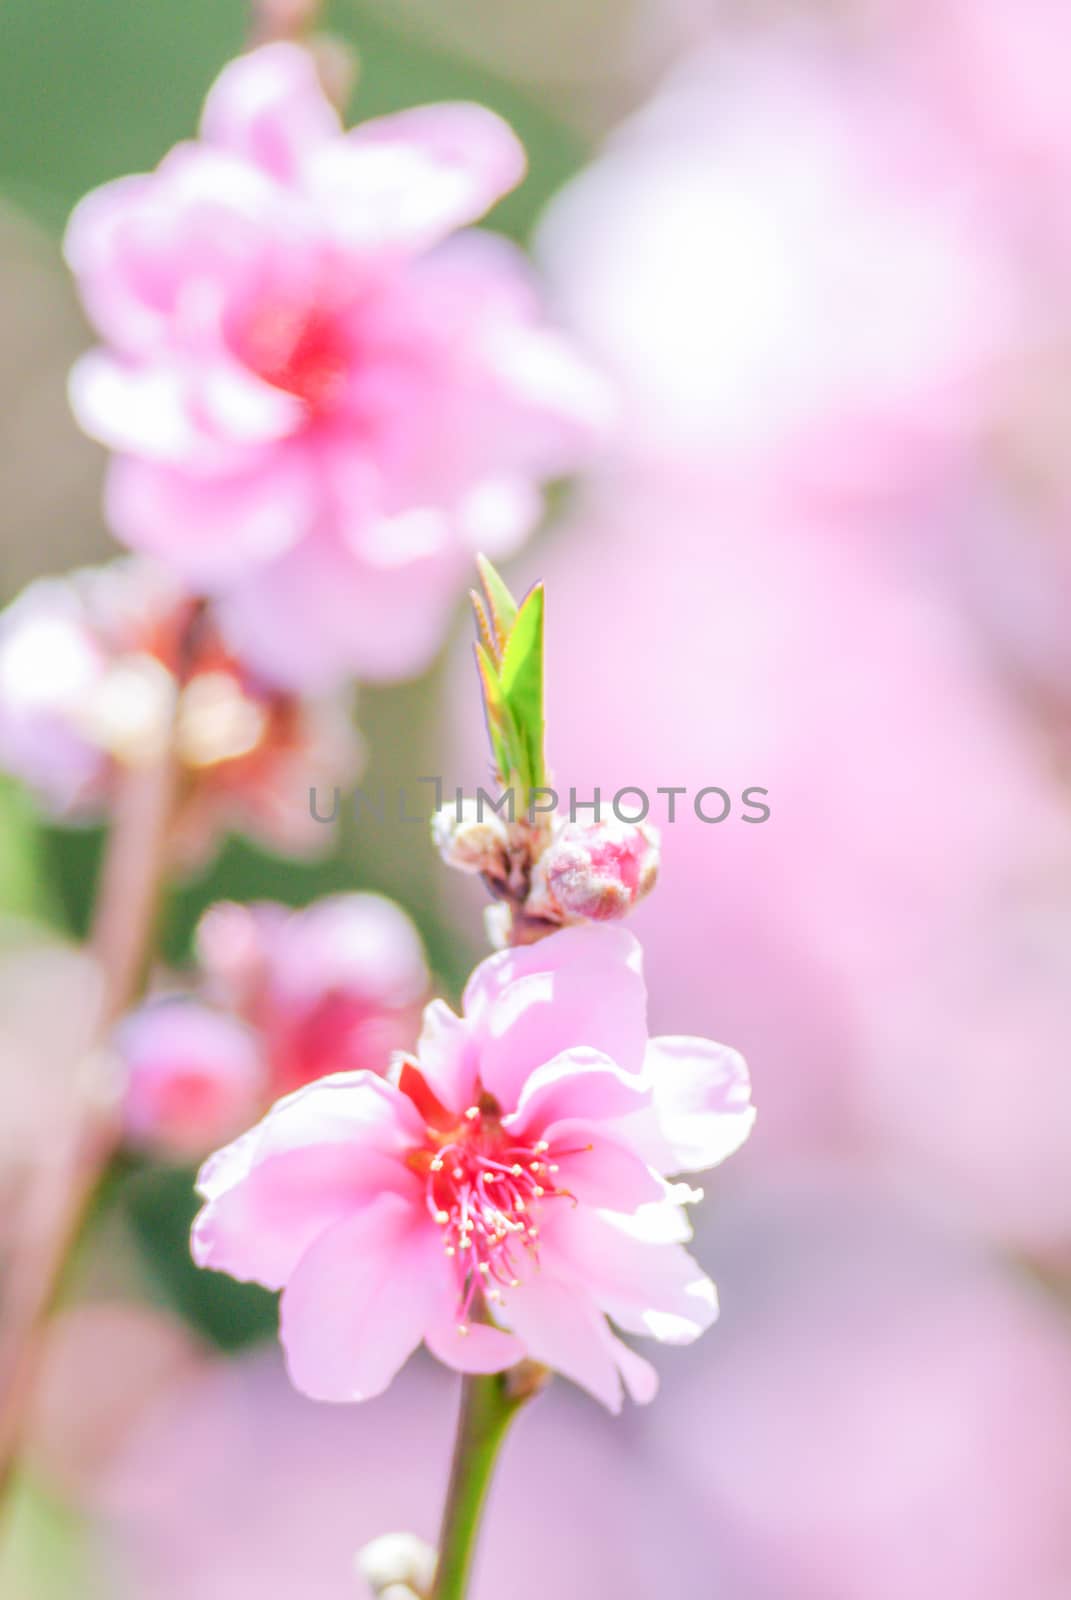 Spring time with beautiful cherry blossoms, pink sakura flowers with pink background.
